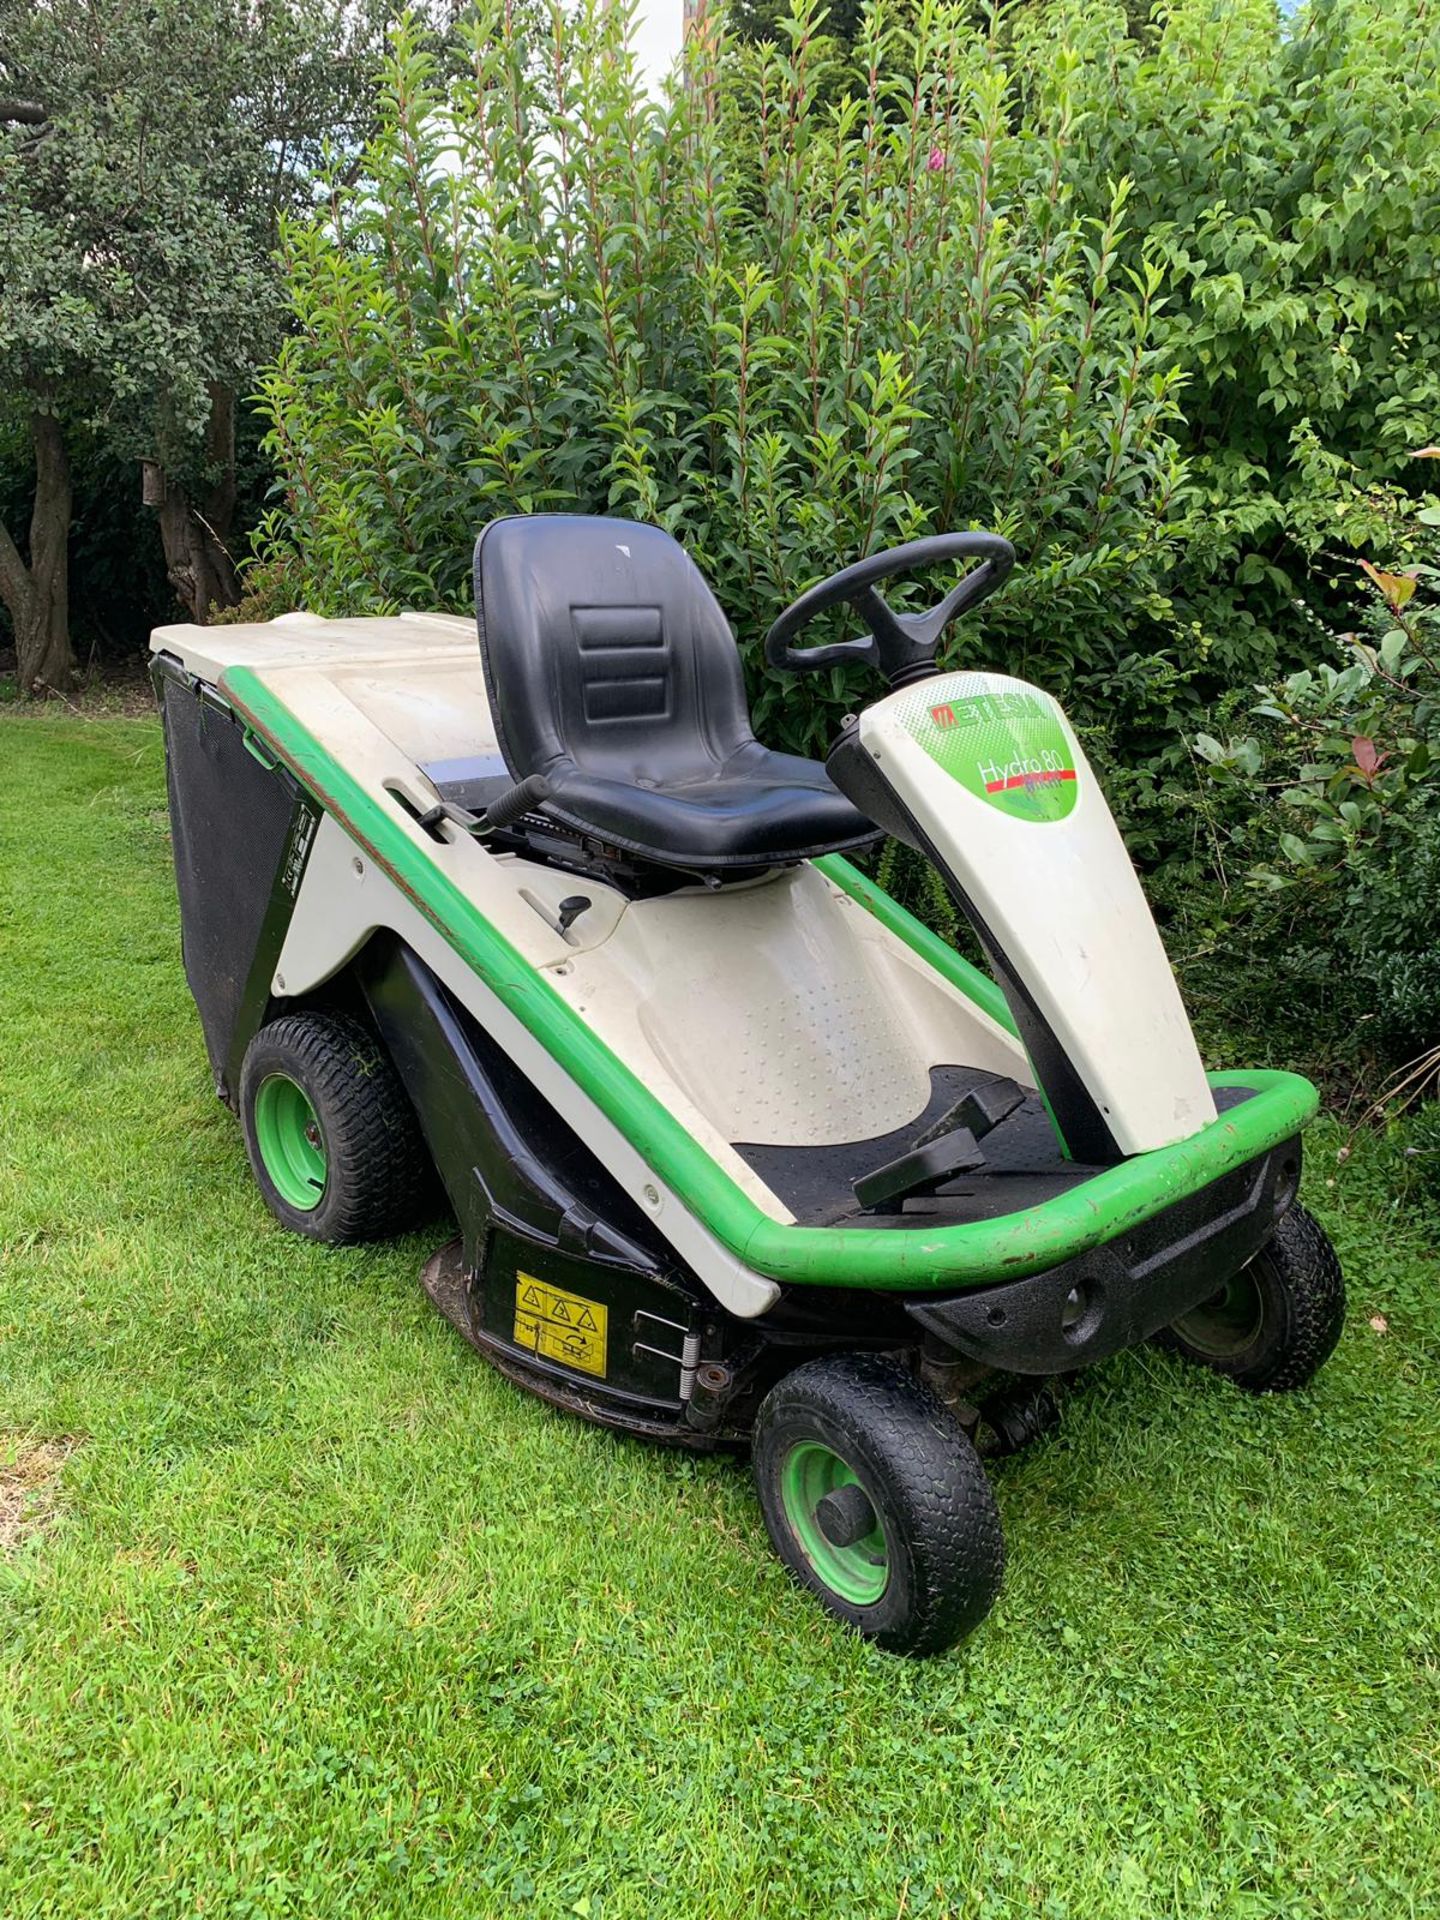 2015 ETESIA HYDRO 80 MKHP 3 RIDE ON LAWN MOWER, 240 KG, 11.9 KW, RUNS AND WORKS *PLUS VAT* - Image 2 of 9